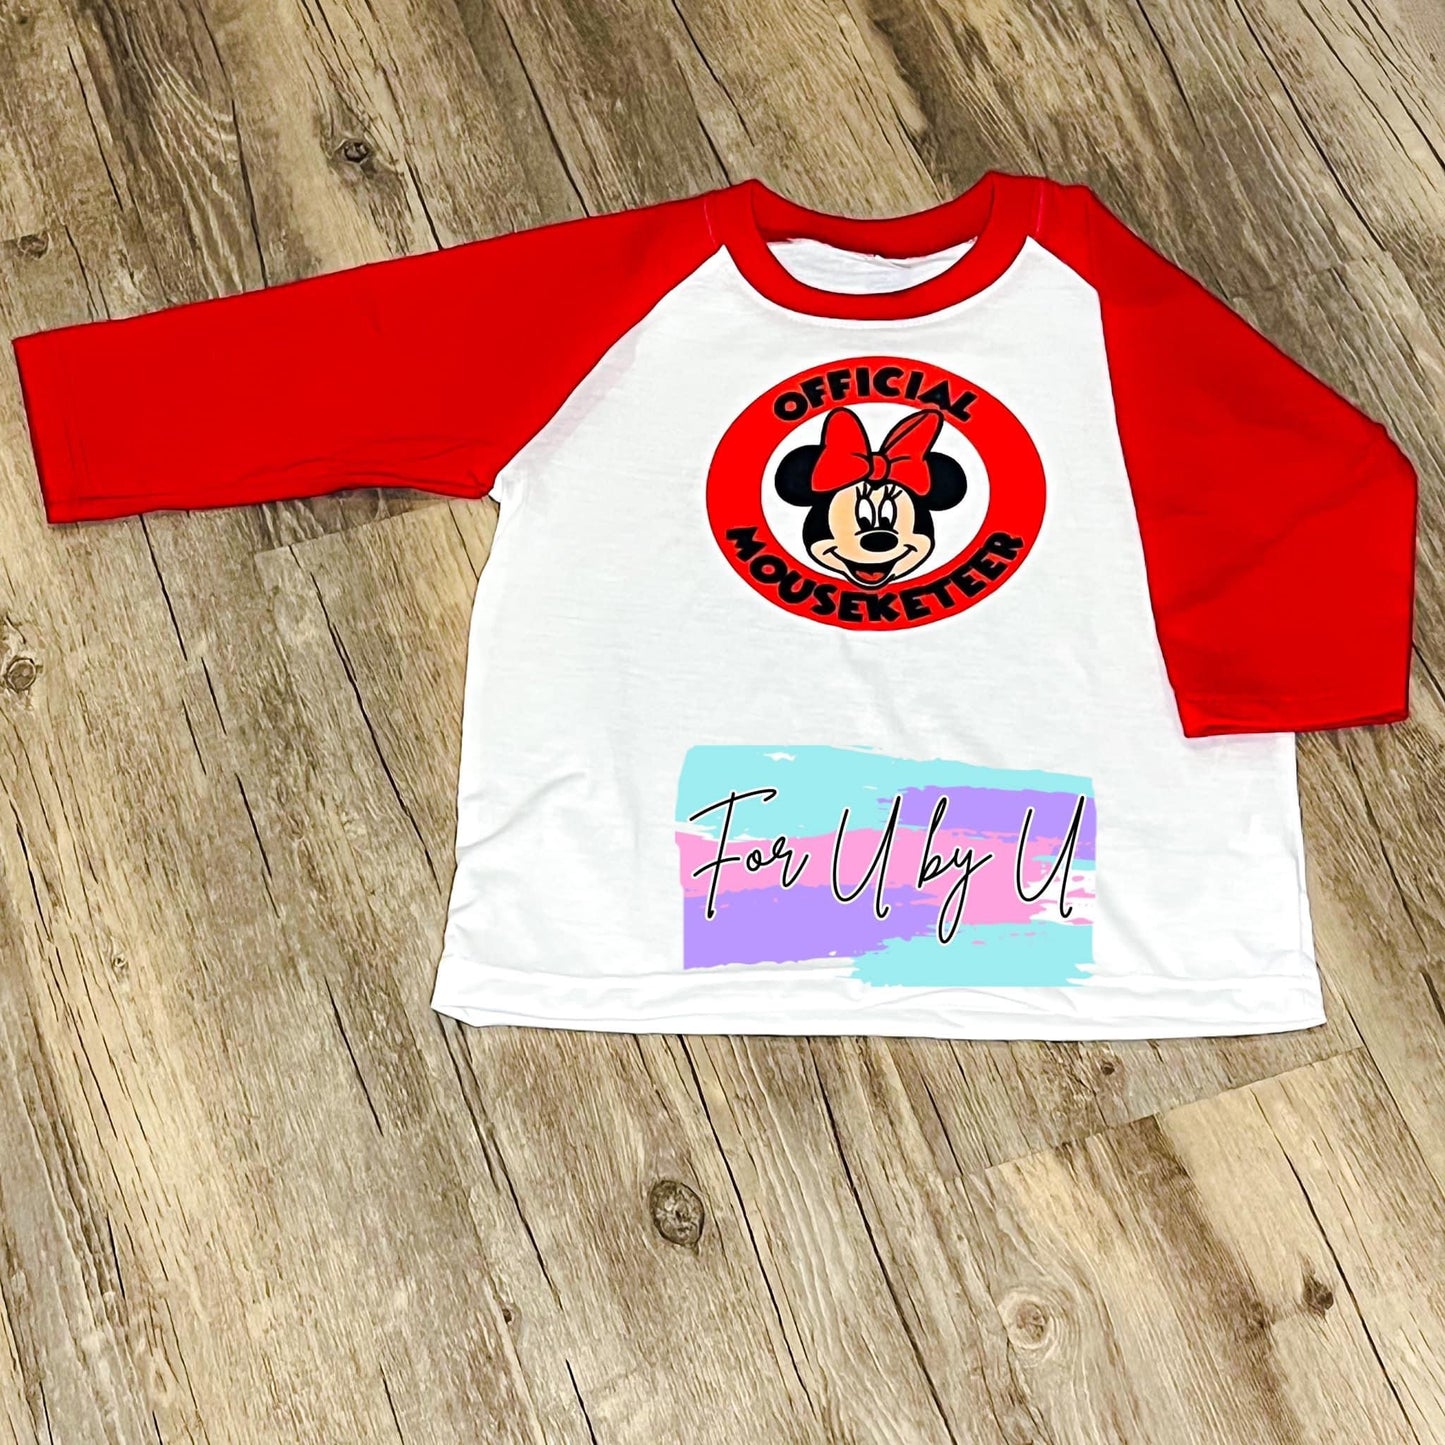 Minnie Official Mouseketeer Shirt